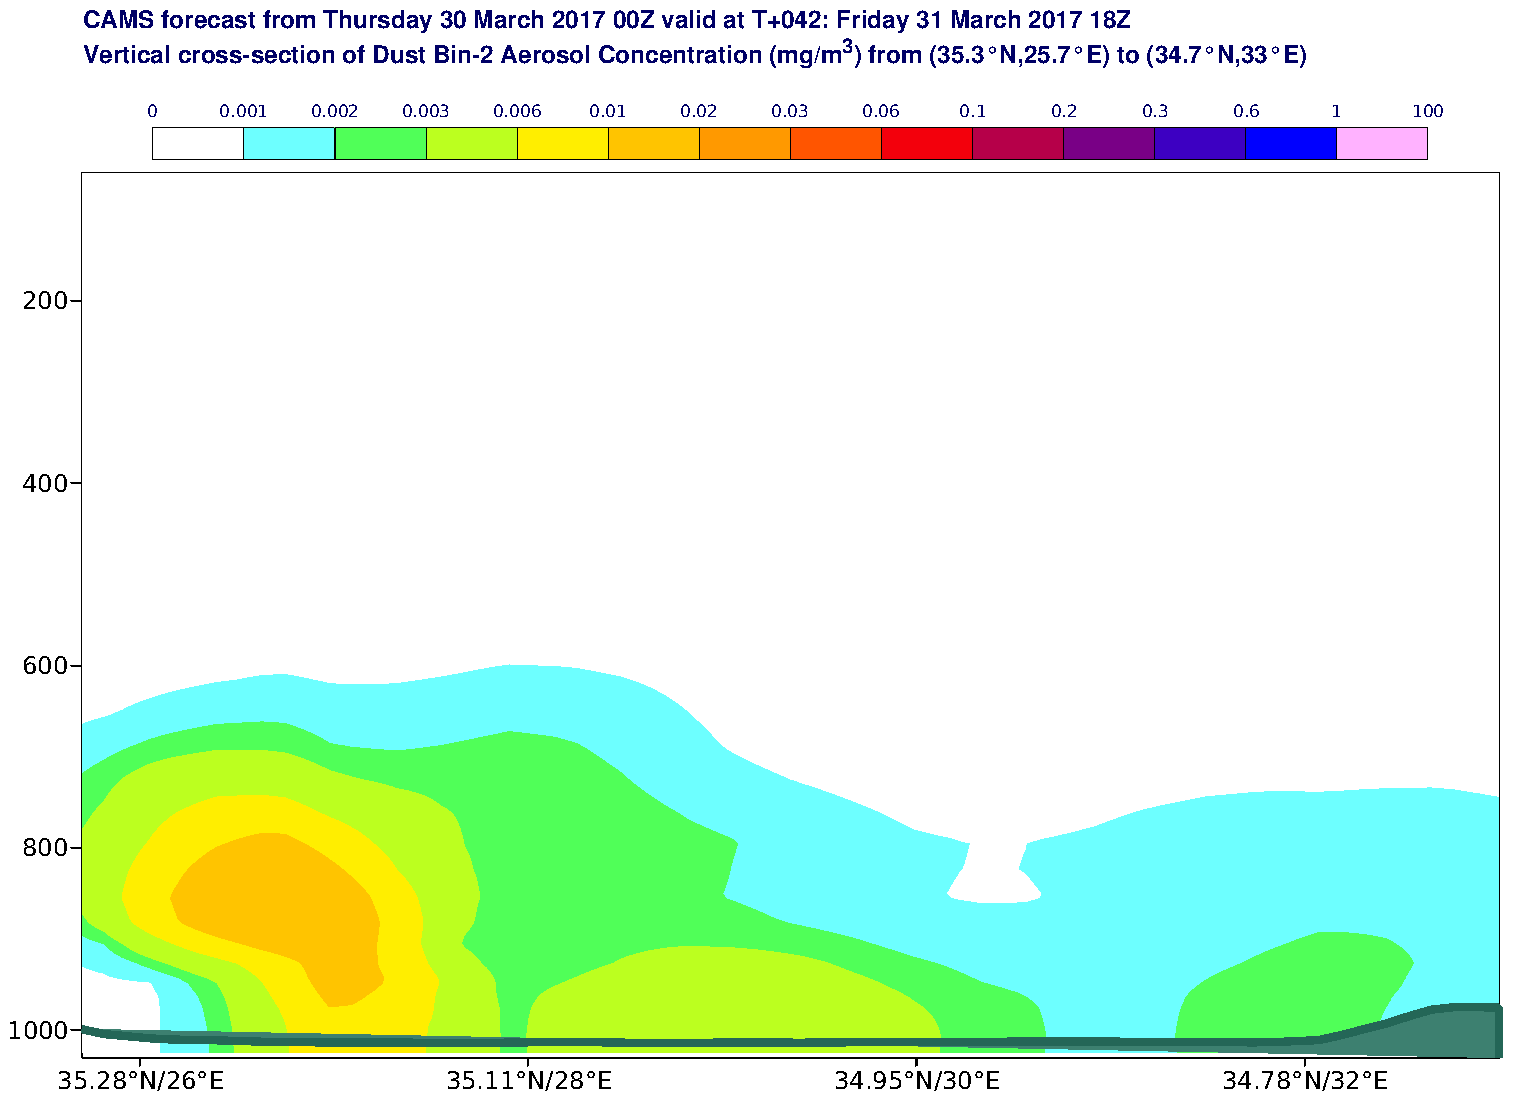 Vertical cross-section of Dust Bin-2 Aerosol Concentration (mg/m3) valid at T42 - 2017-03-31 18:00